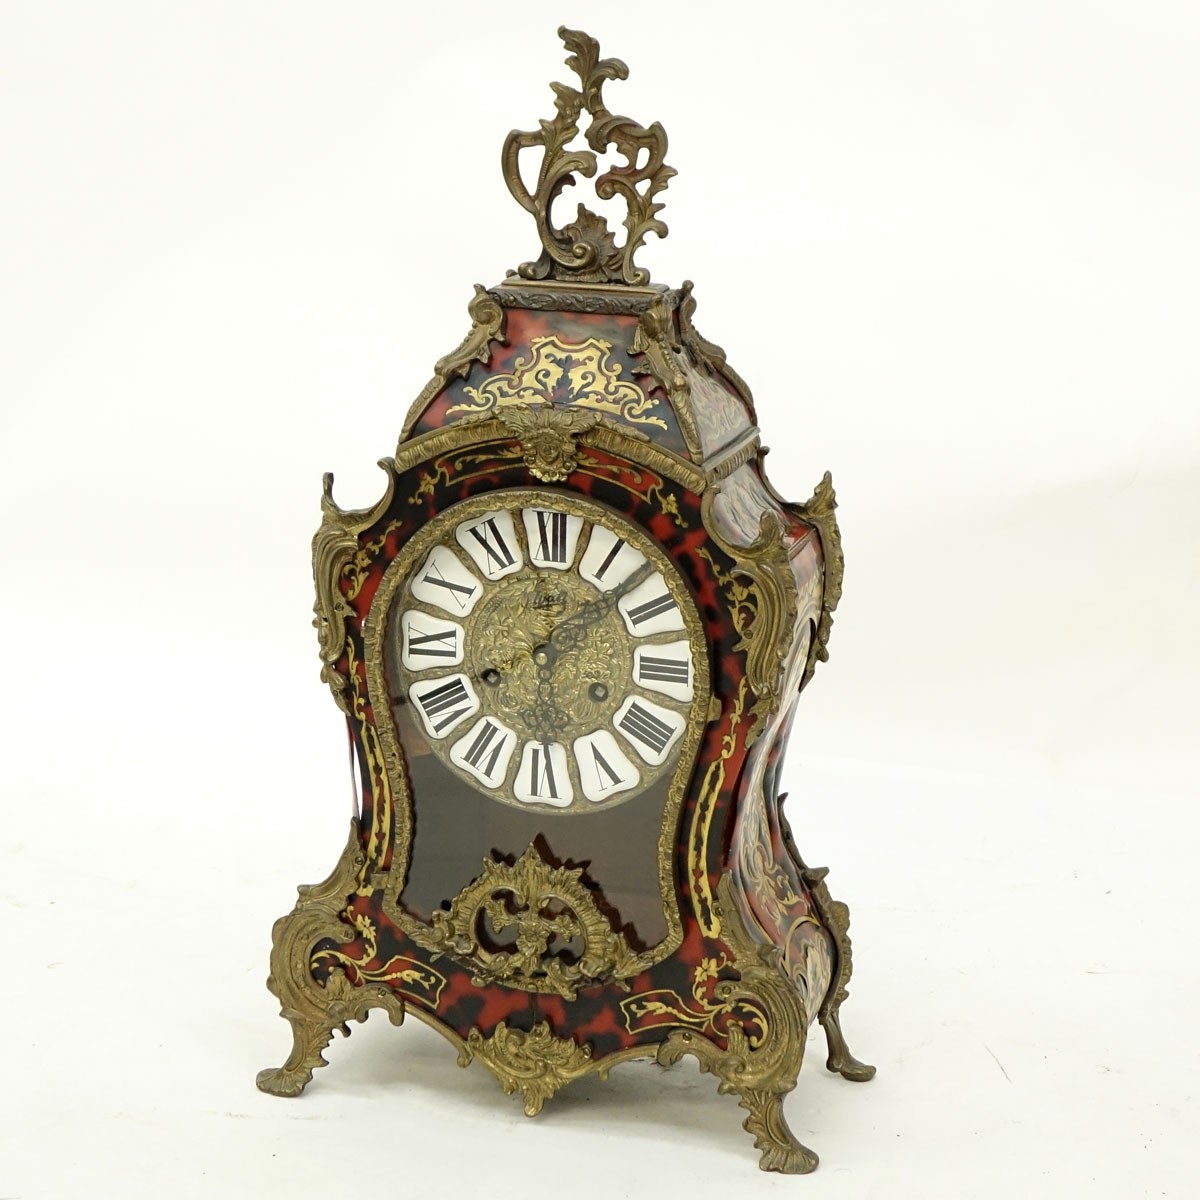 Modern French Boulle Style Gilt Brass Mounted Bracket Clock. Enameled mounted dial with Roman numerals, key and pendulum included.